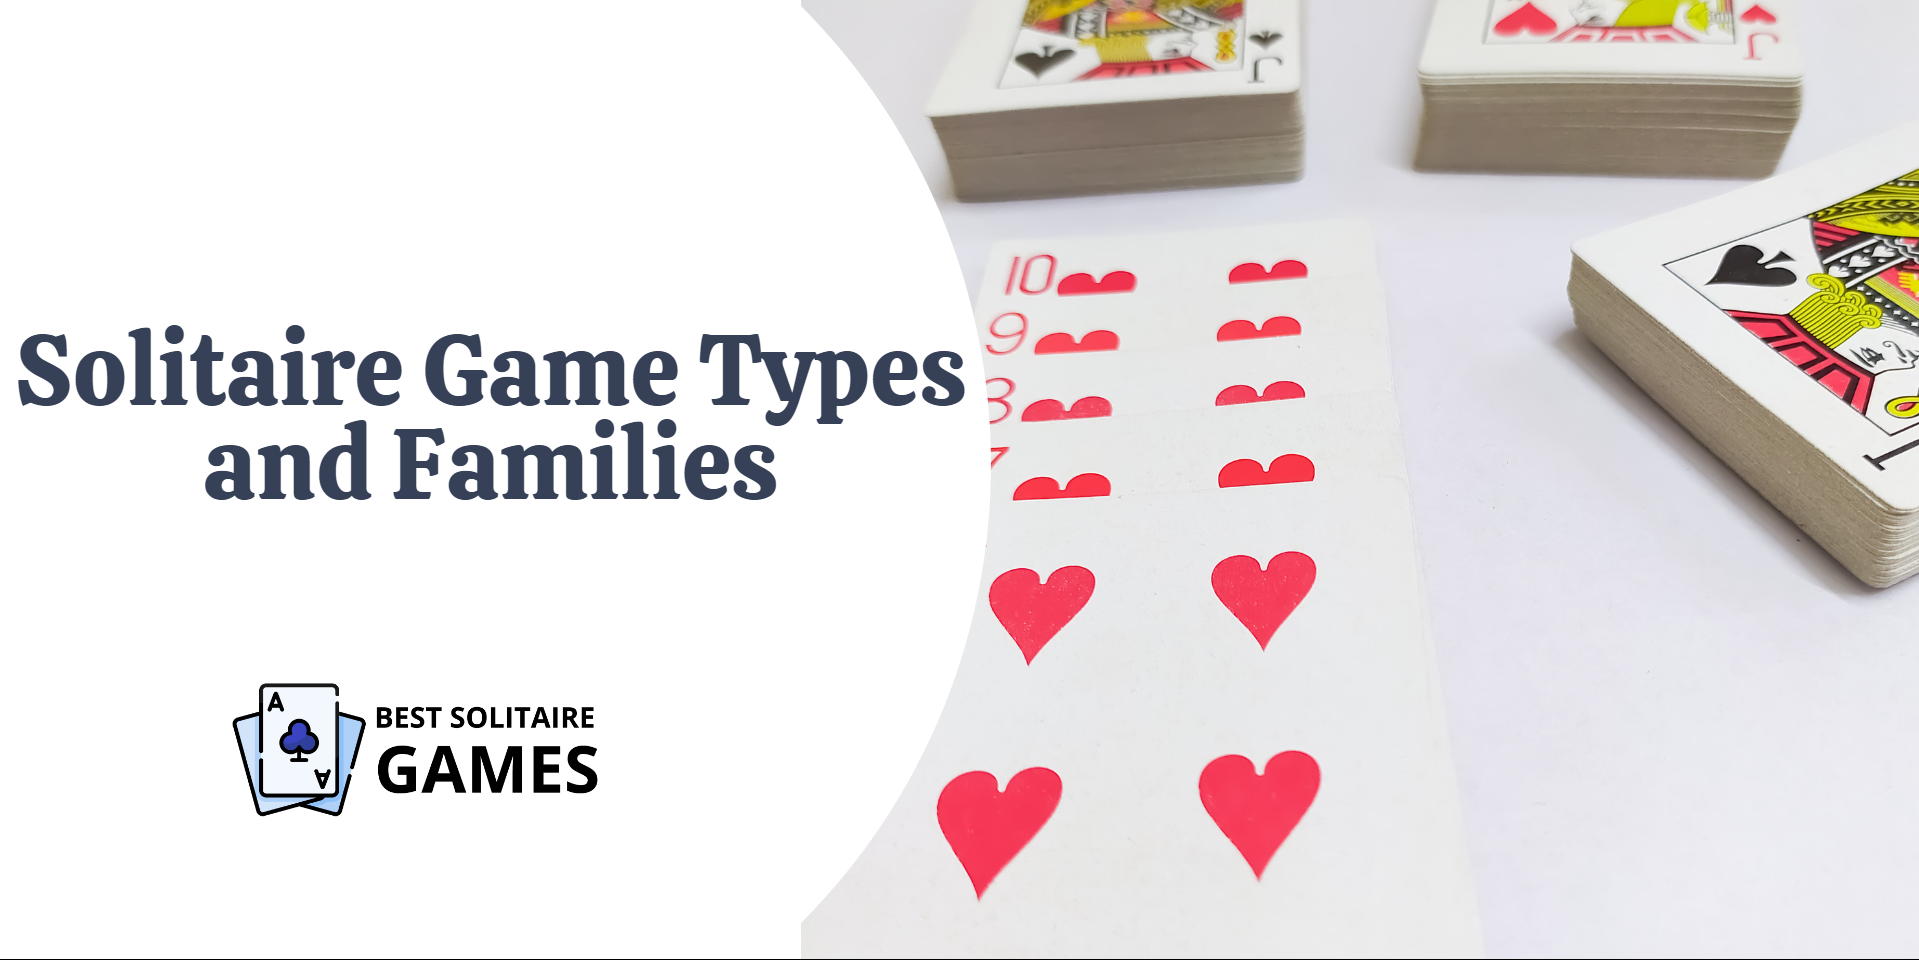 You are currently viewing Solitaire Game Types and Families